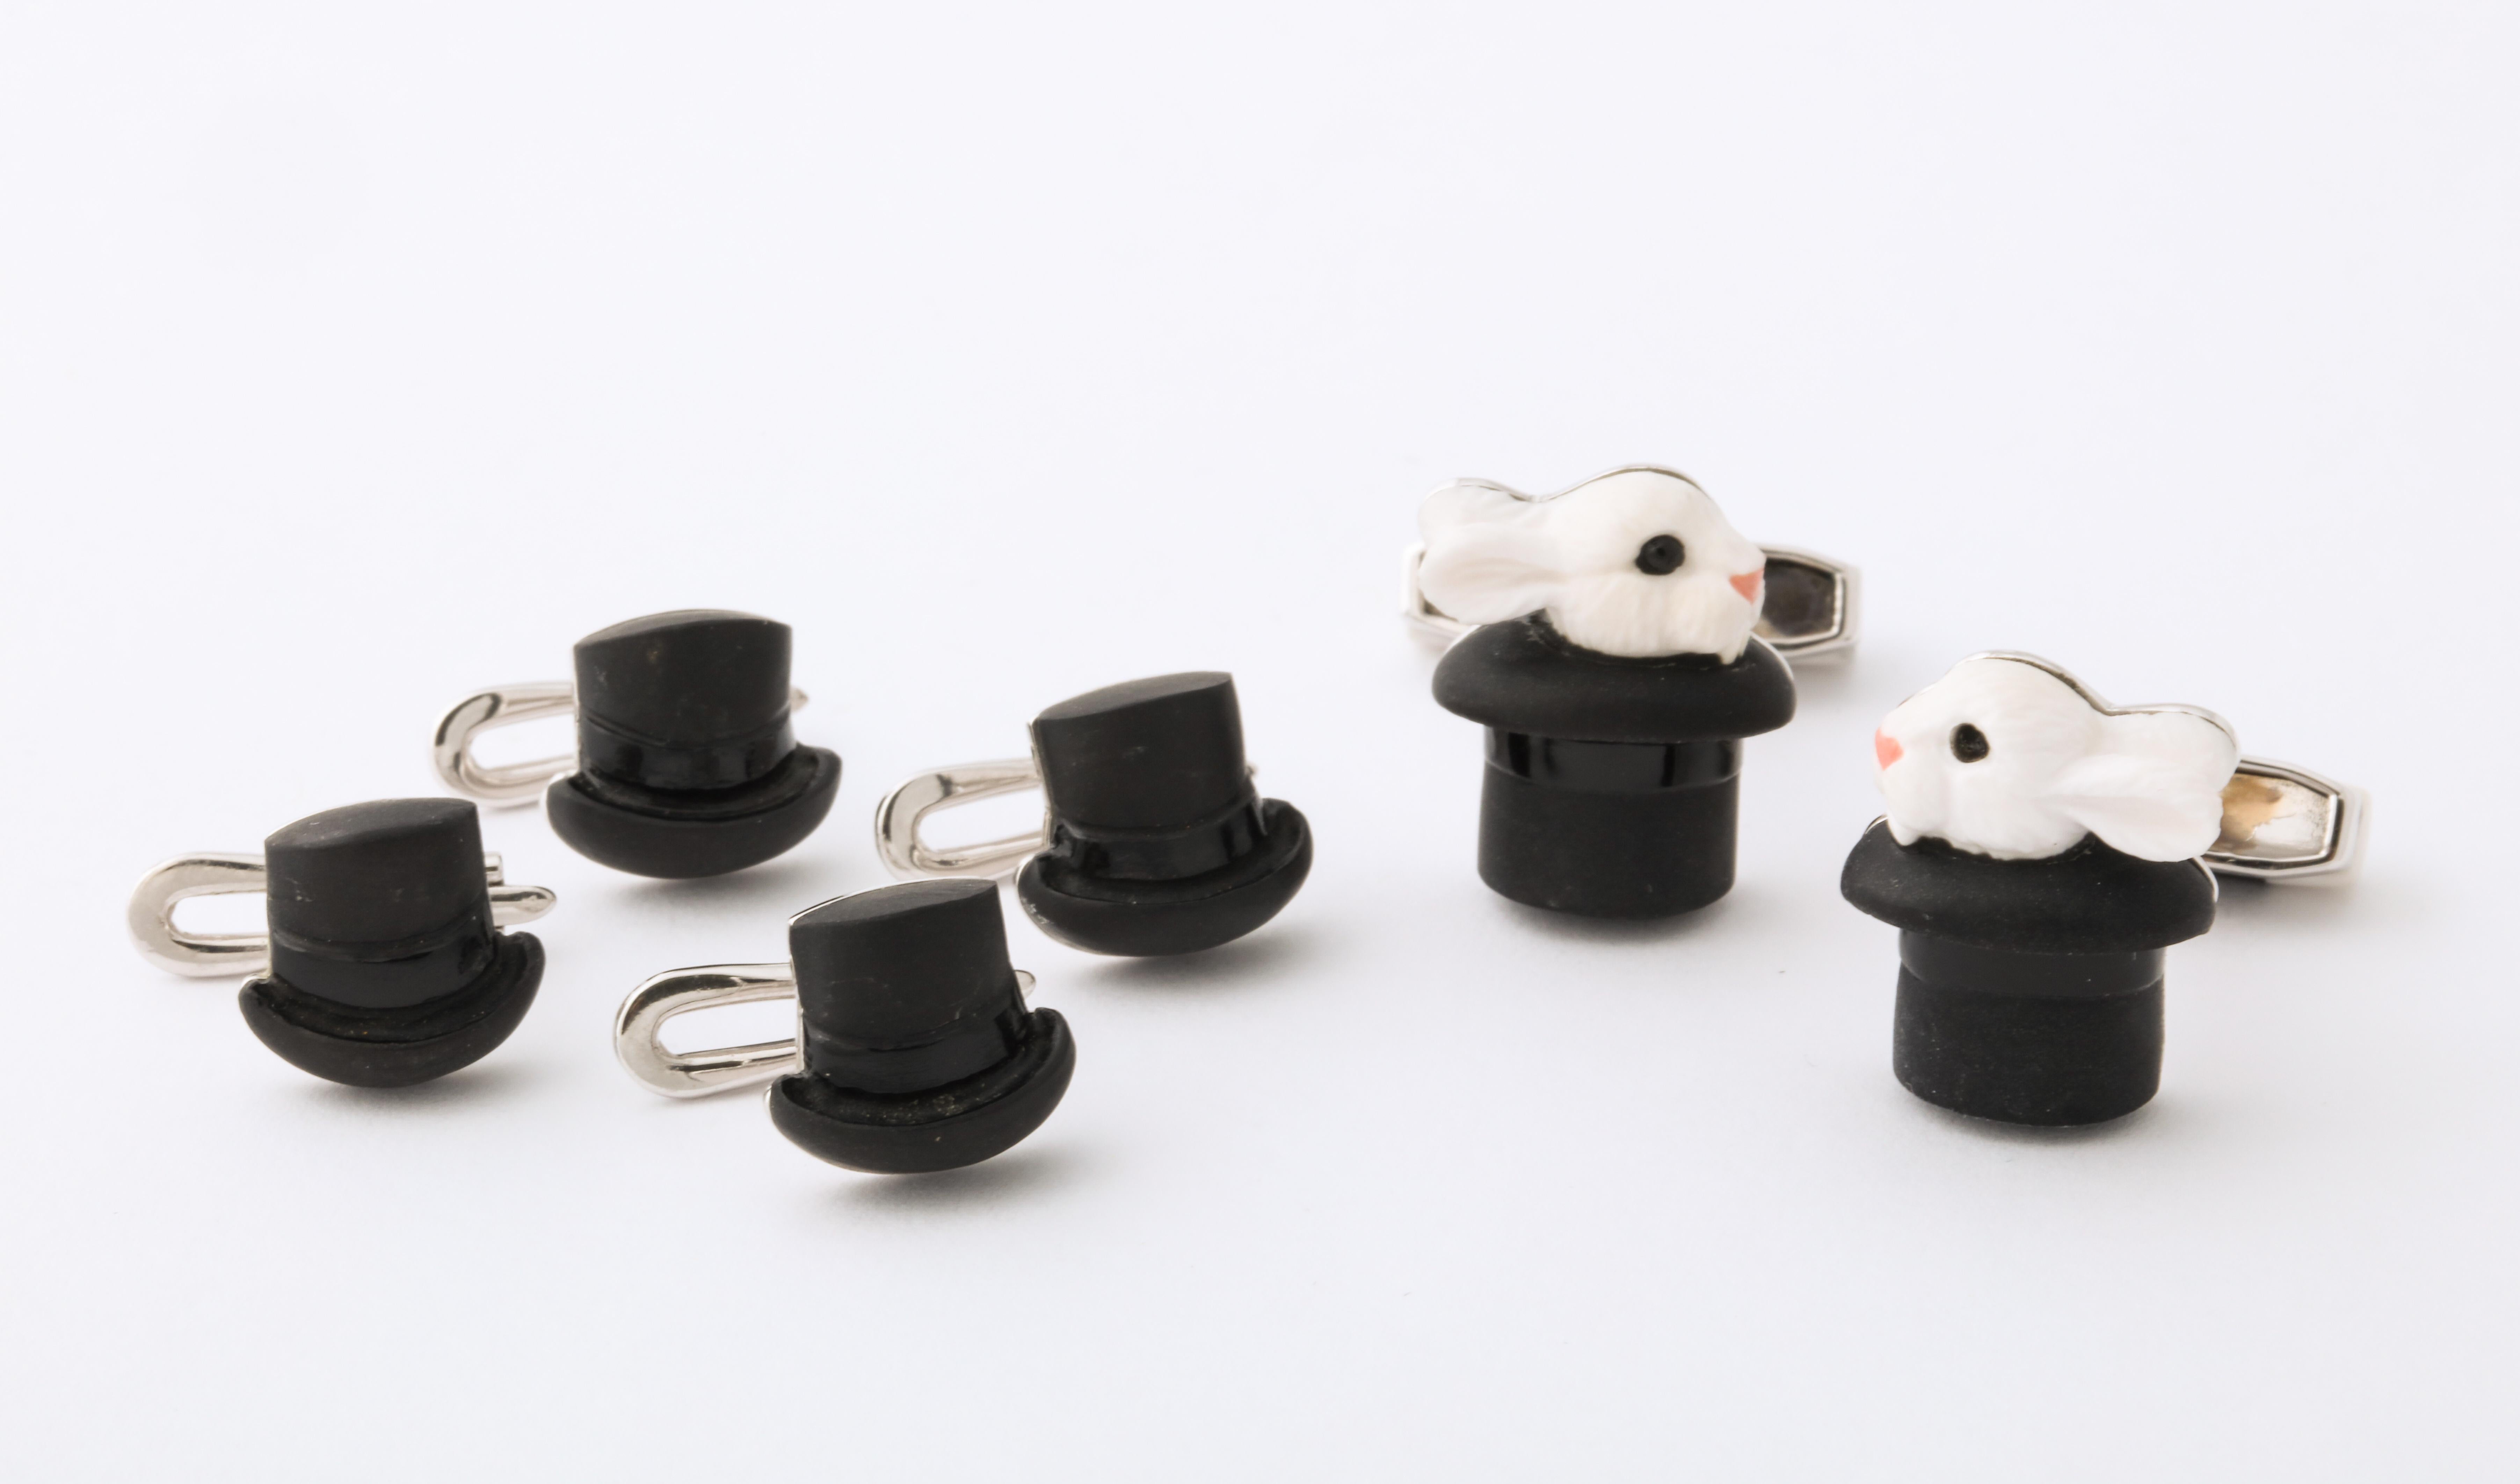 Intricately carved from cocholong and black onyx with enamel accents, these cufflinks and shirt studs are truly magical.  Using the the ancient art of intarsia, the two stones appear as one.  The spring back of the cufflinks even features a matching